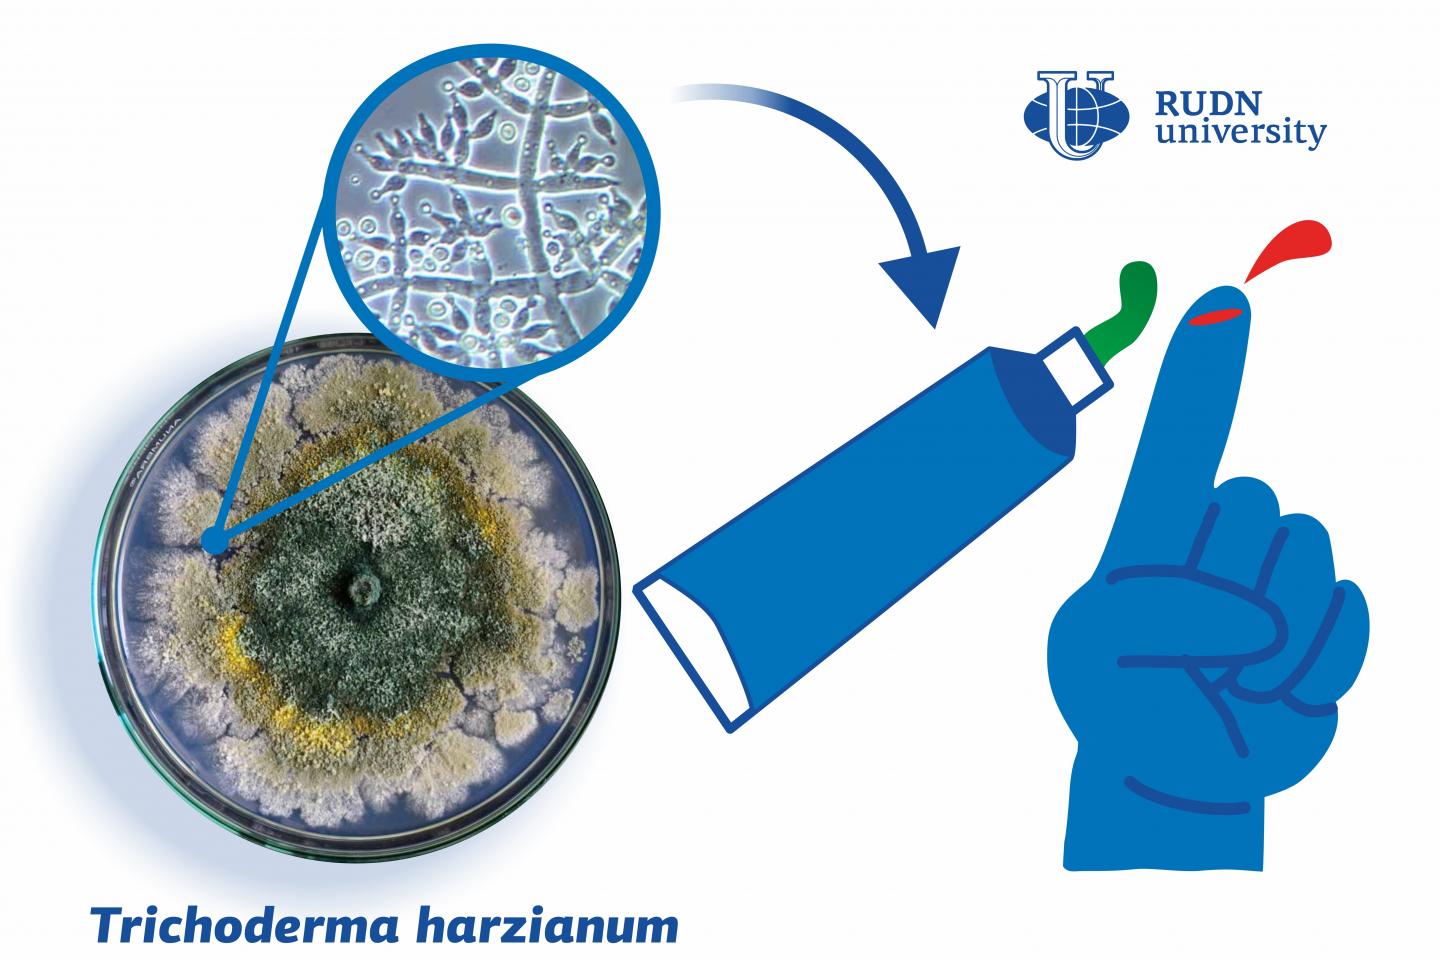 RUDN University Medics Created a Wound-Healing Gel with Metabolic Products of Trichoderma harzianum